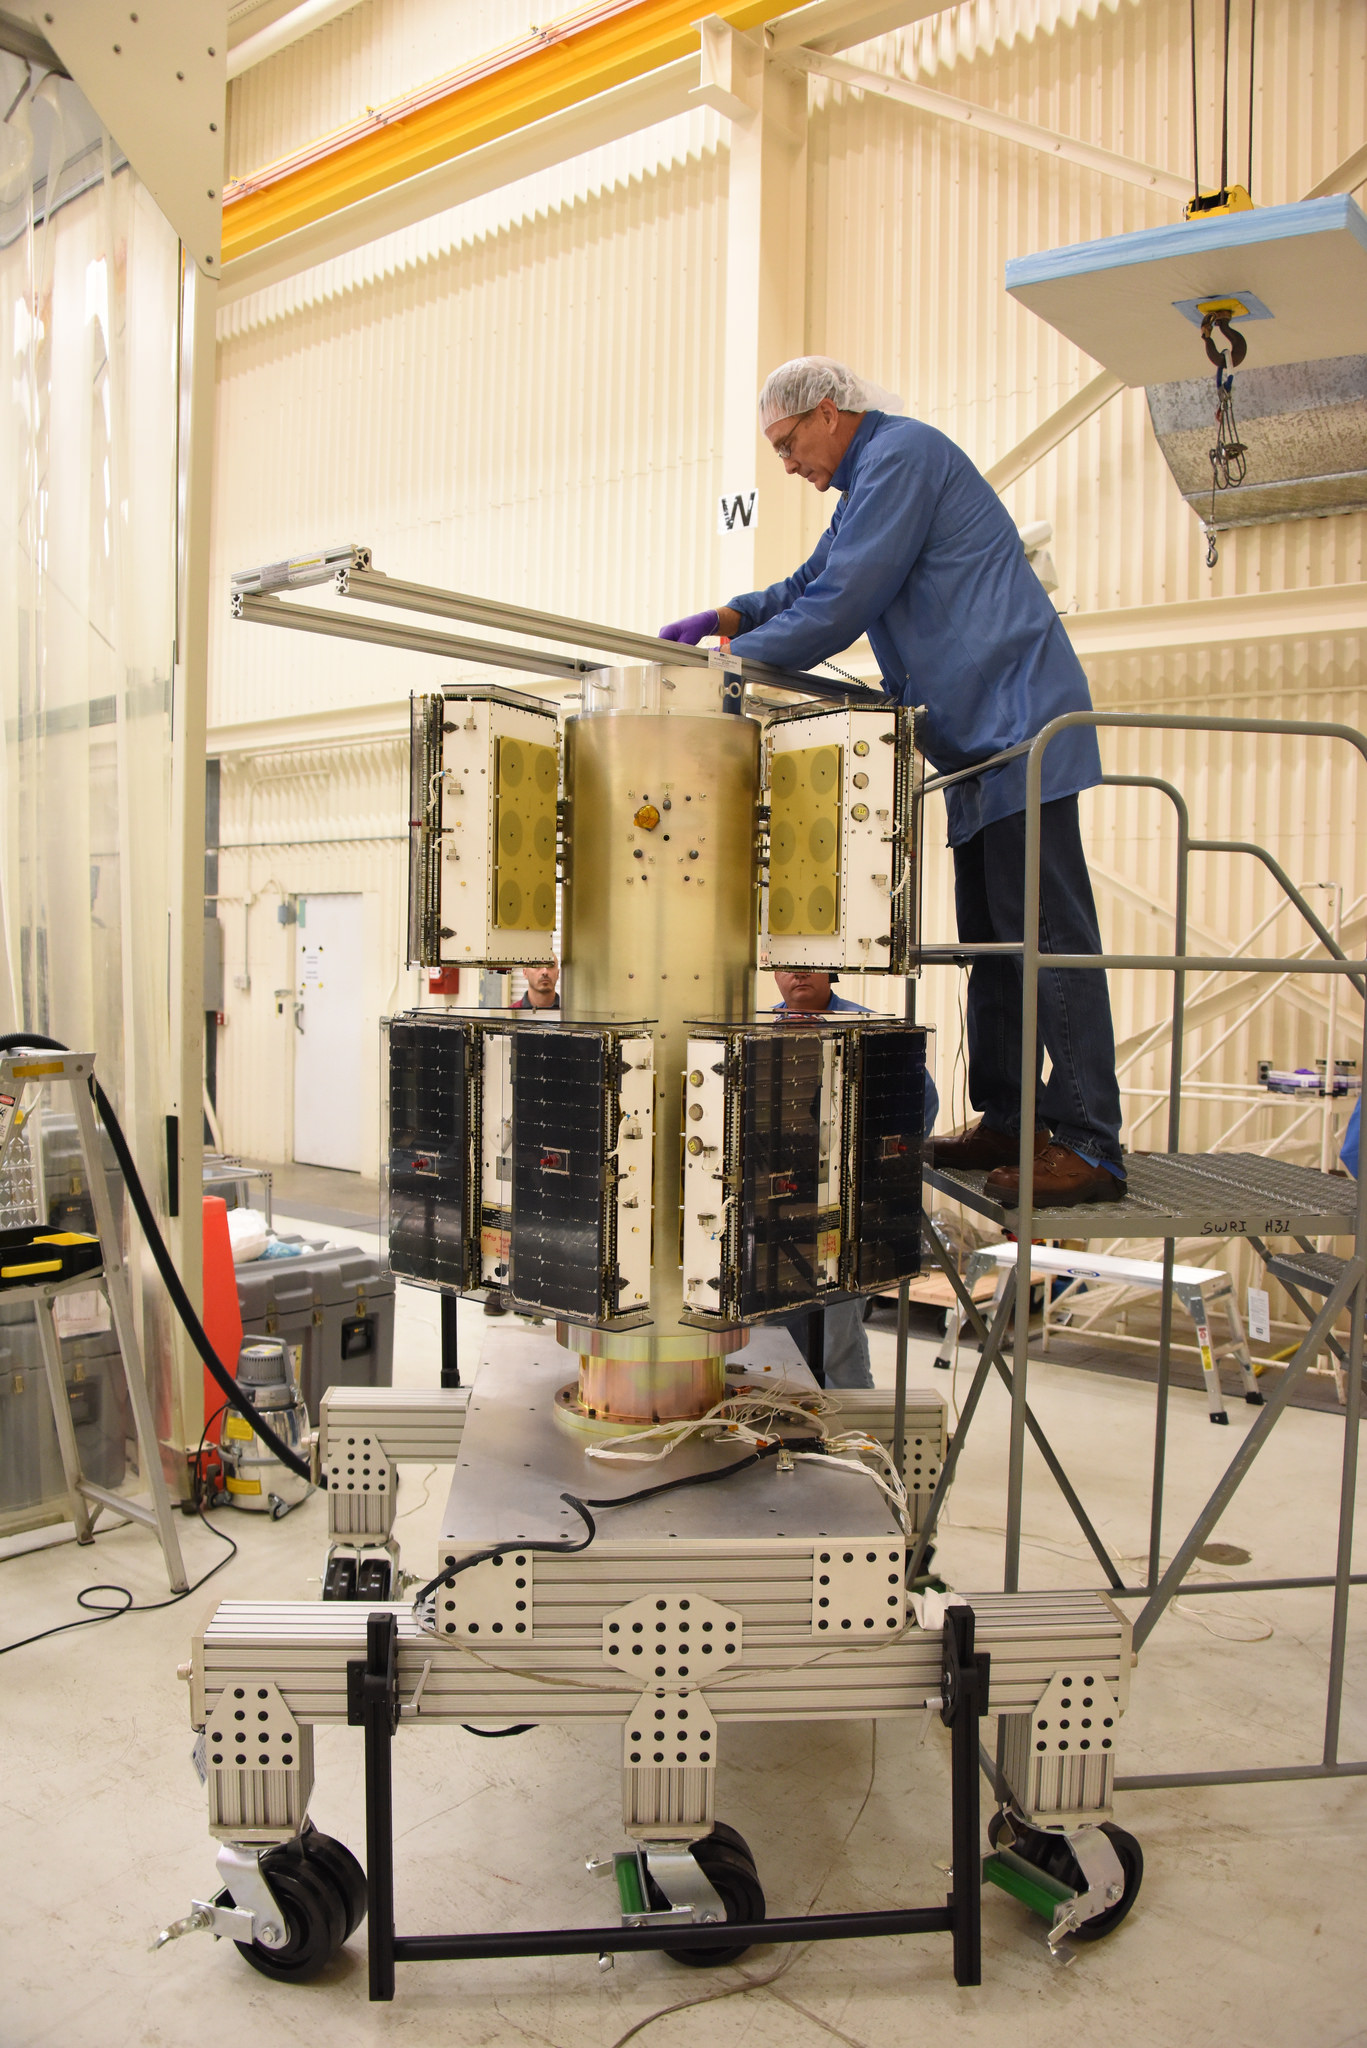 An Orbital ATK technician checks the installation of two of the eight the CYGNSS microsatellites on their deployment module at Vandenberg Air Force Base in California.  Credits: Photo credit: USAF 